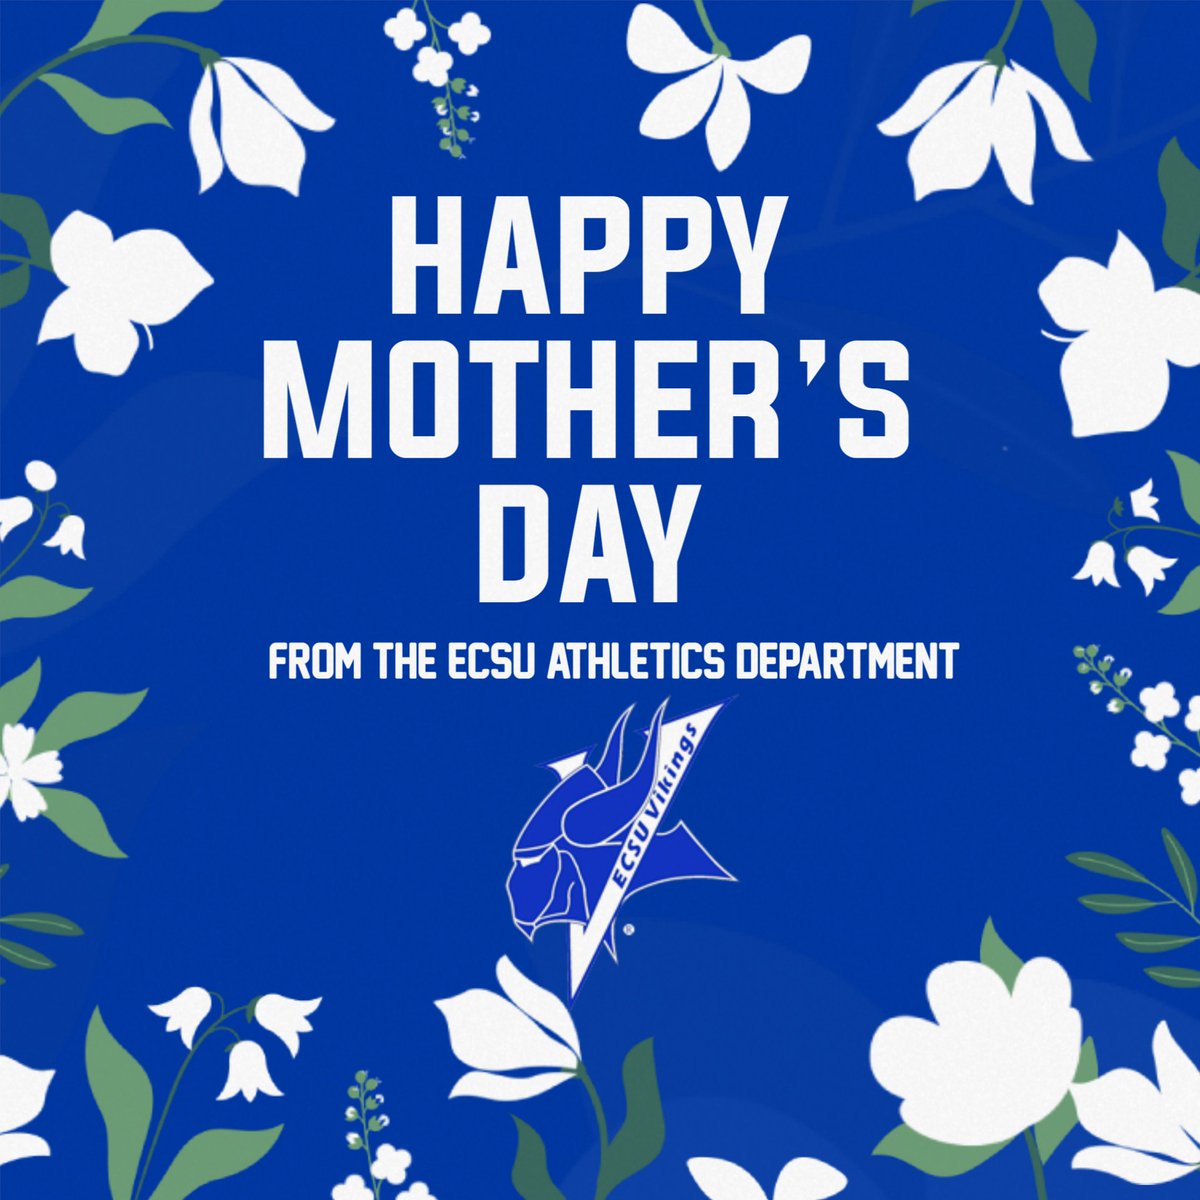 Wishing all the mothers in Viking Land a happy Mother's Day! 💙💐🤍